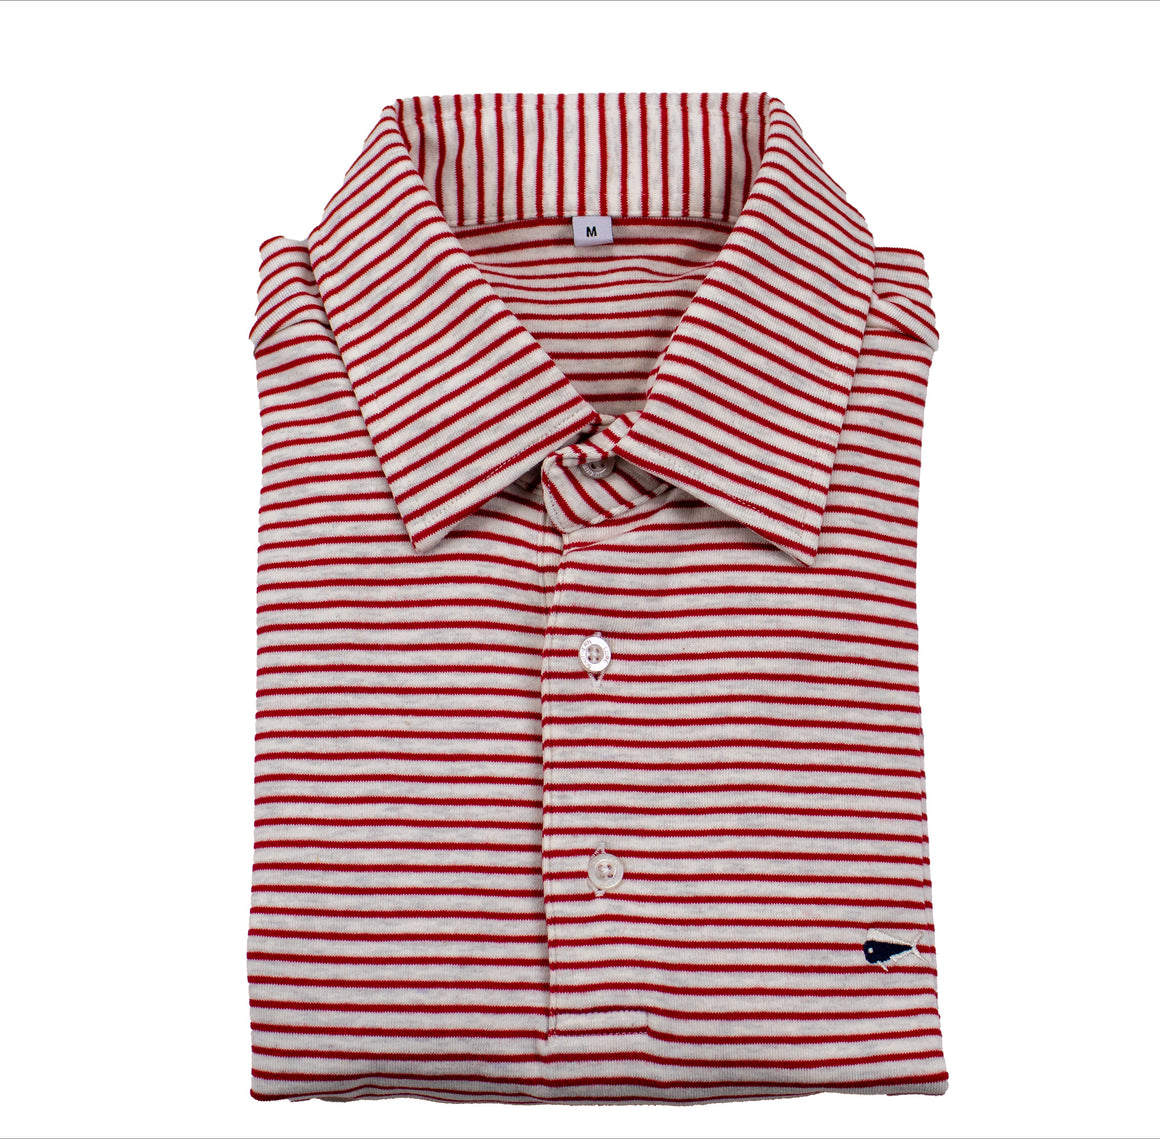 Youth & Toddler Short Sleeve Cotton Polo Shirt - Heather Red Stripe